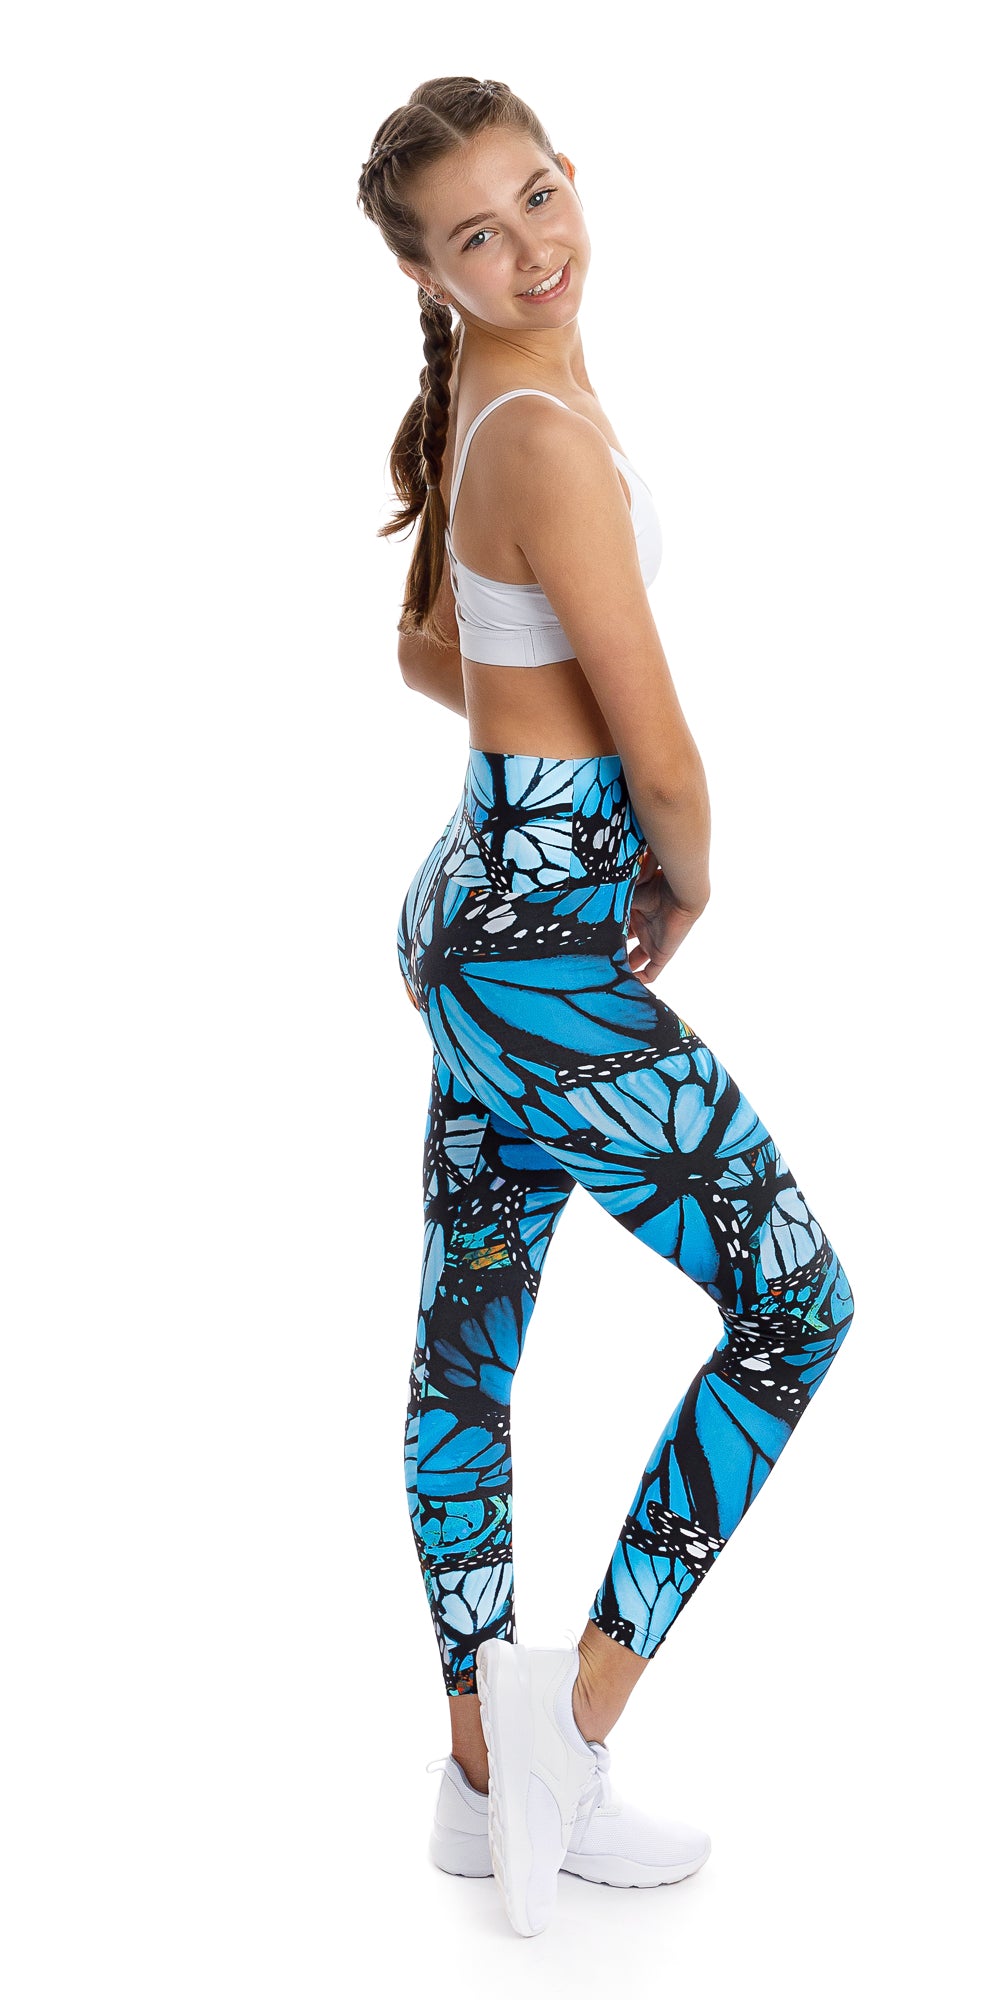 Full body side view of girl teenager in blue and black animal print Tween JH Butterfly Ultra High Waist 7/8 Leggings and white bra lifting right heel and putting left hand on waist while smiling for the camera